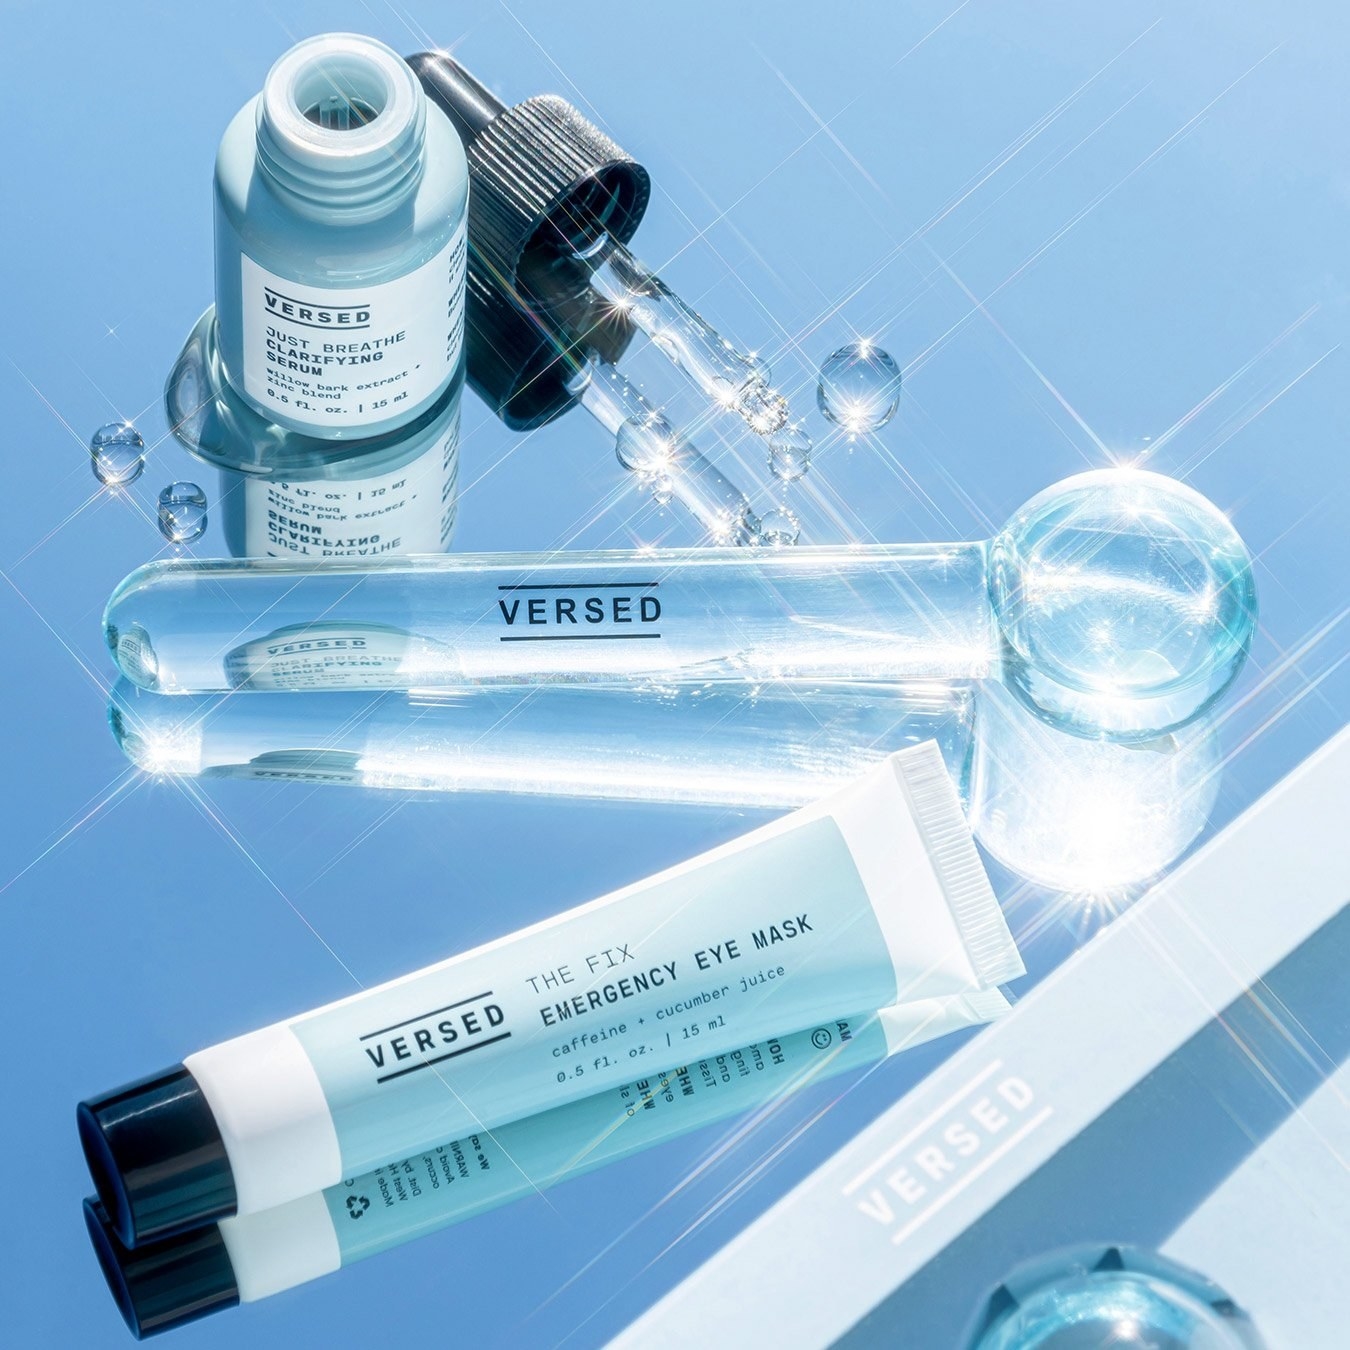 the serum, eye mask, and blue cooling globes